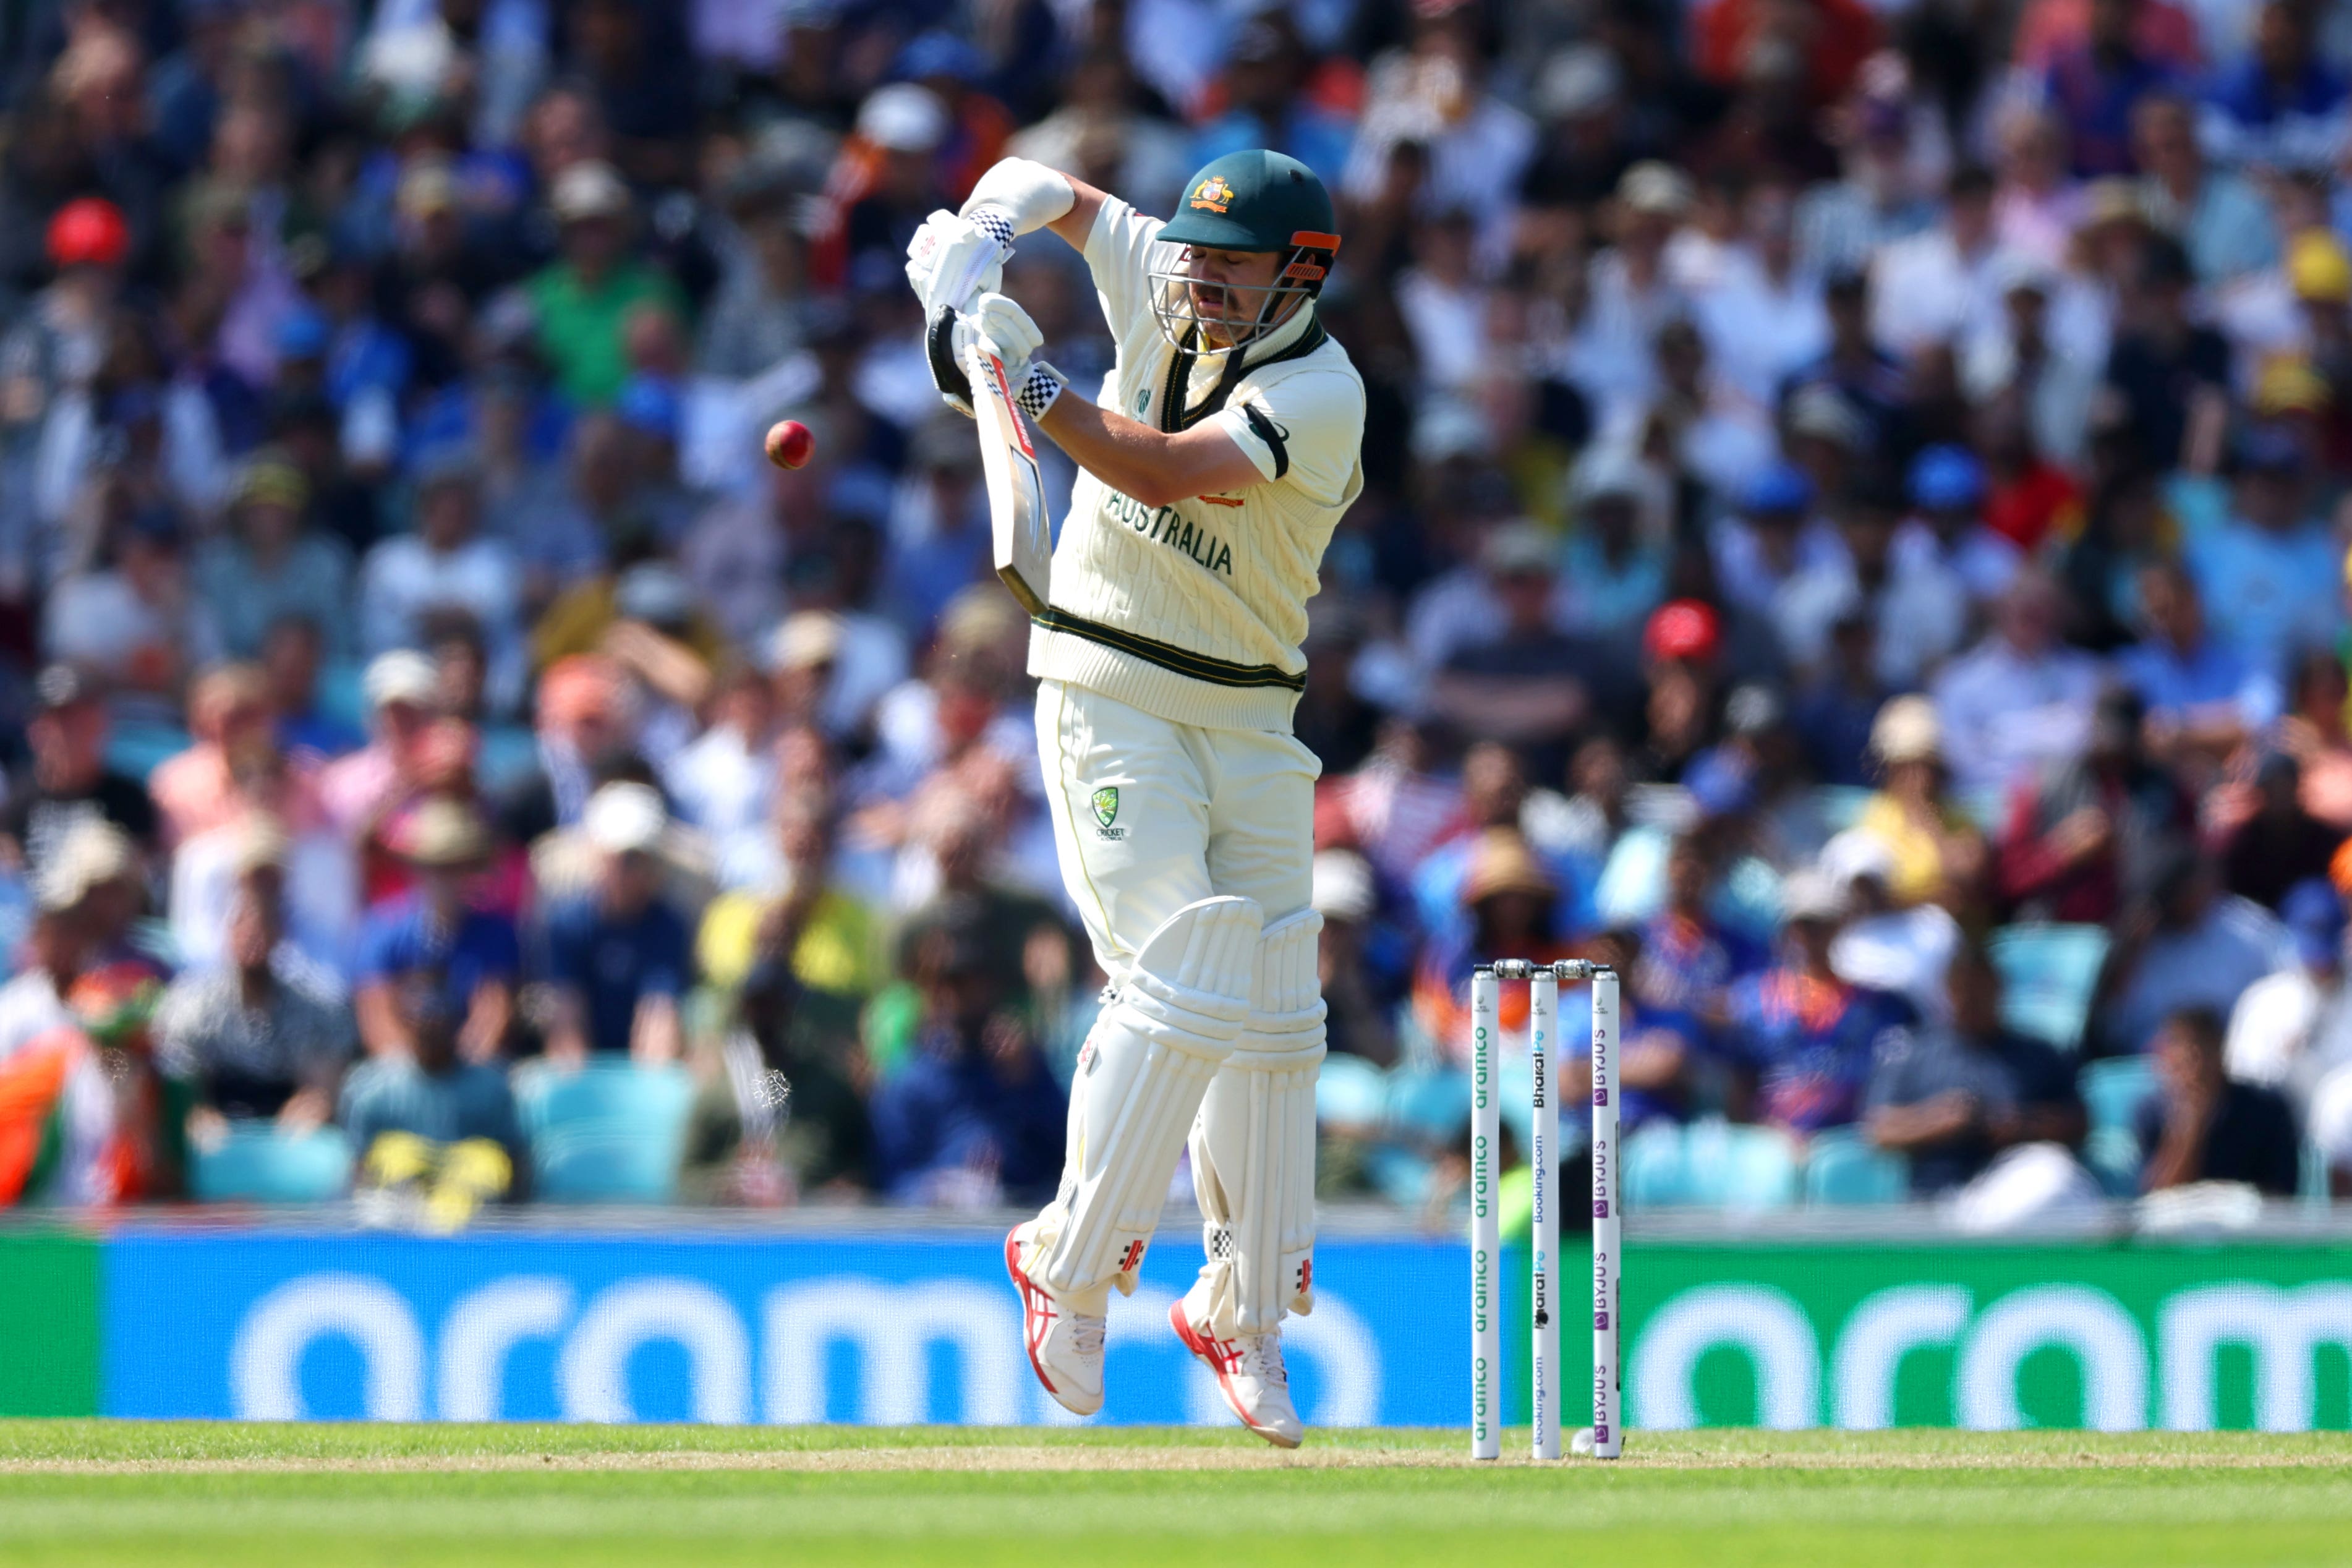 Australia’s Travis Head scored a century against India a week before the Ashes